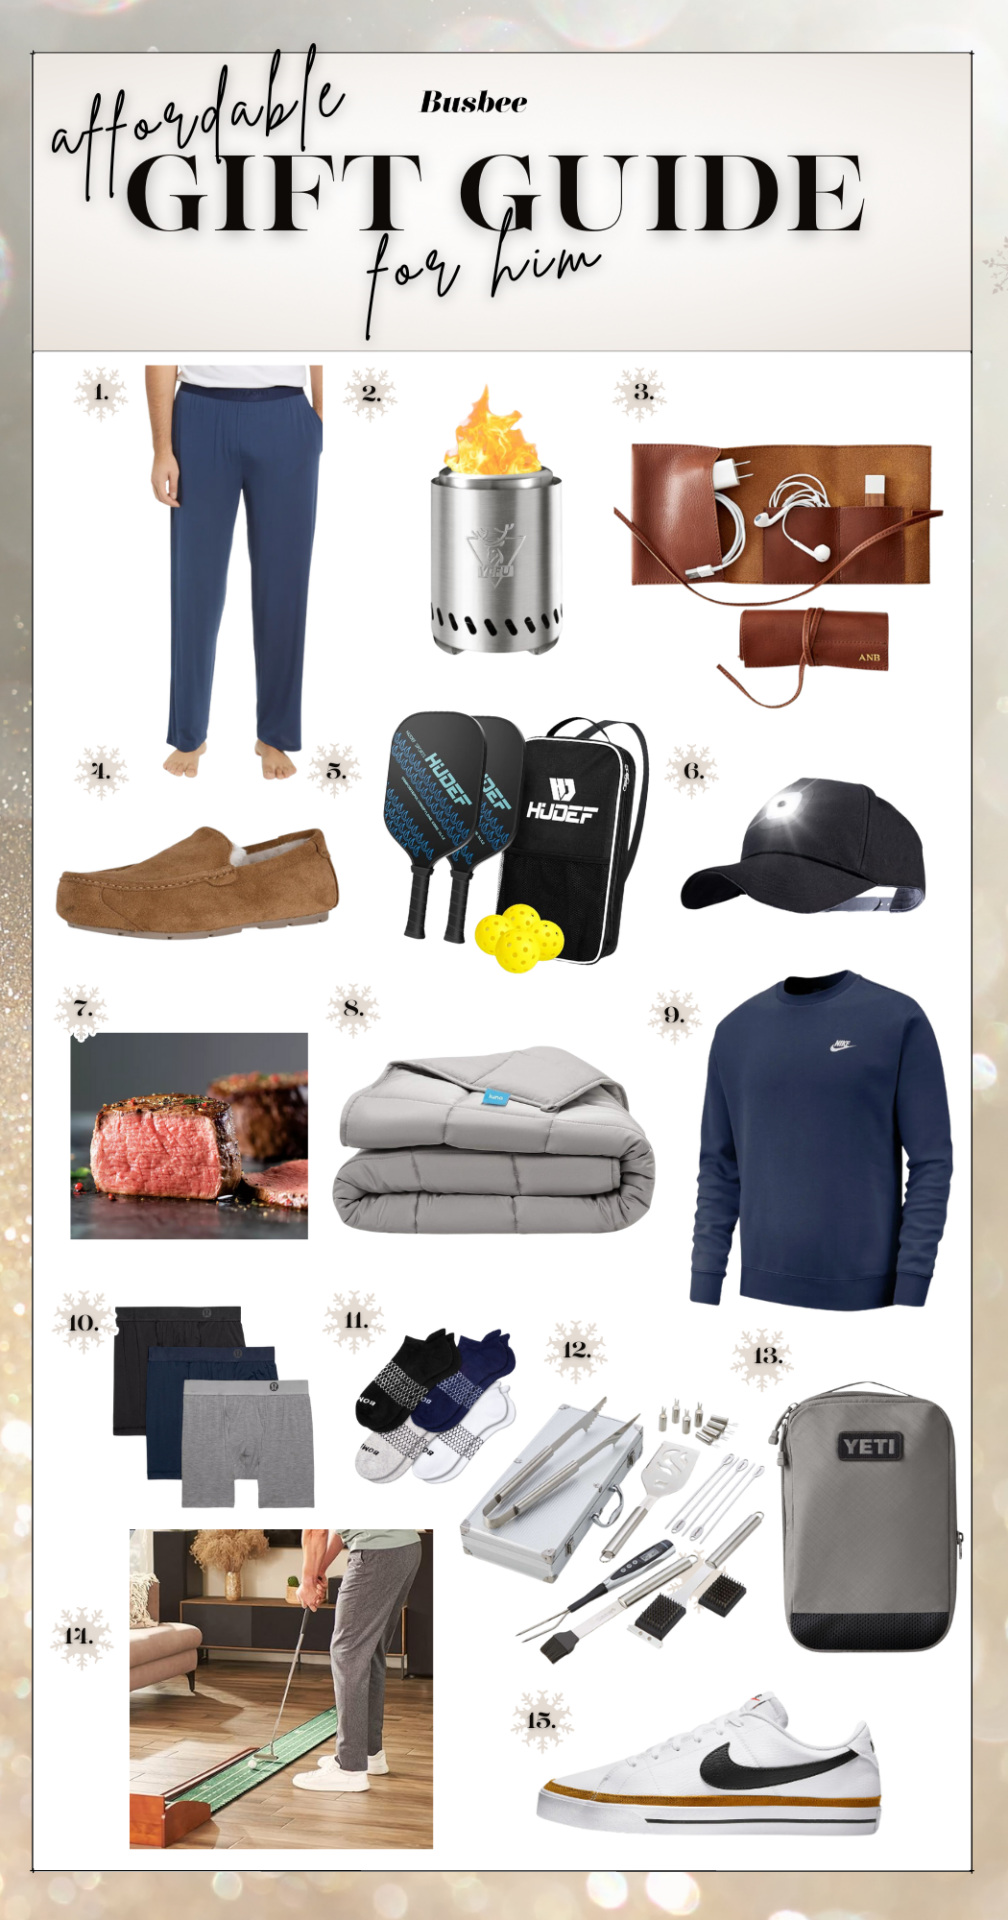 Affordable Holiday Gift Guides for him